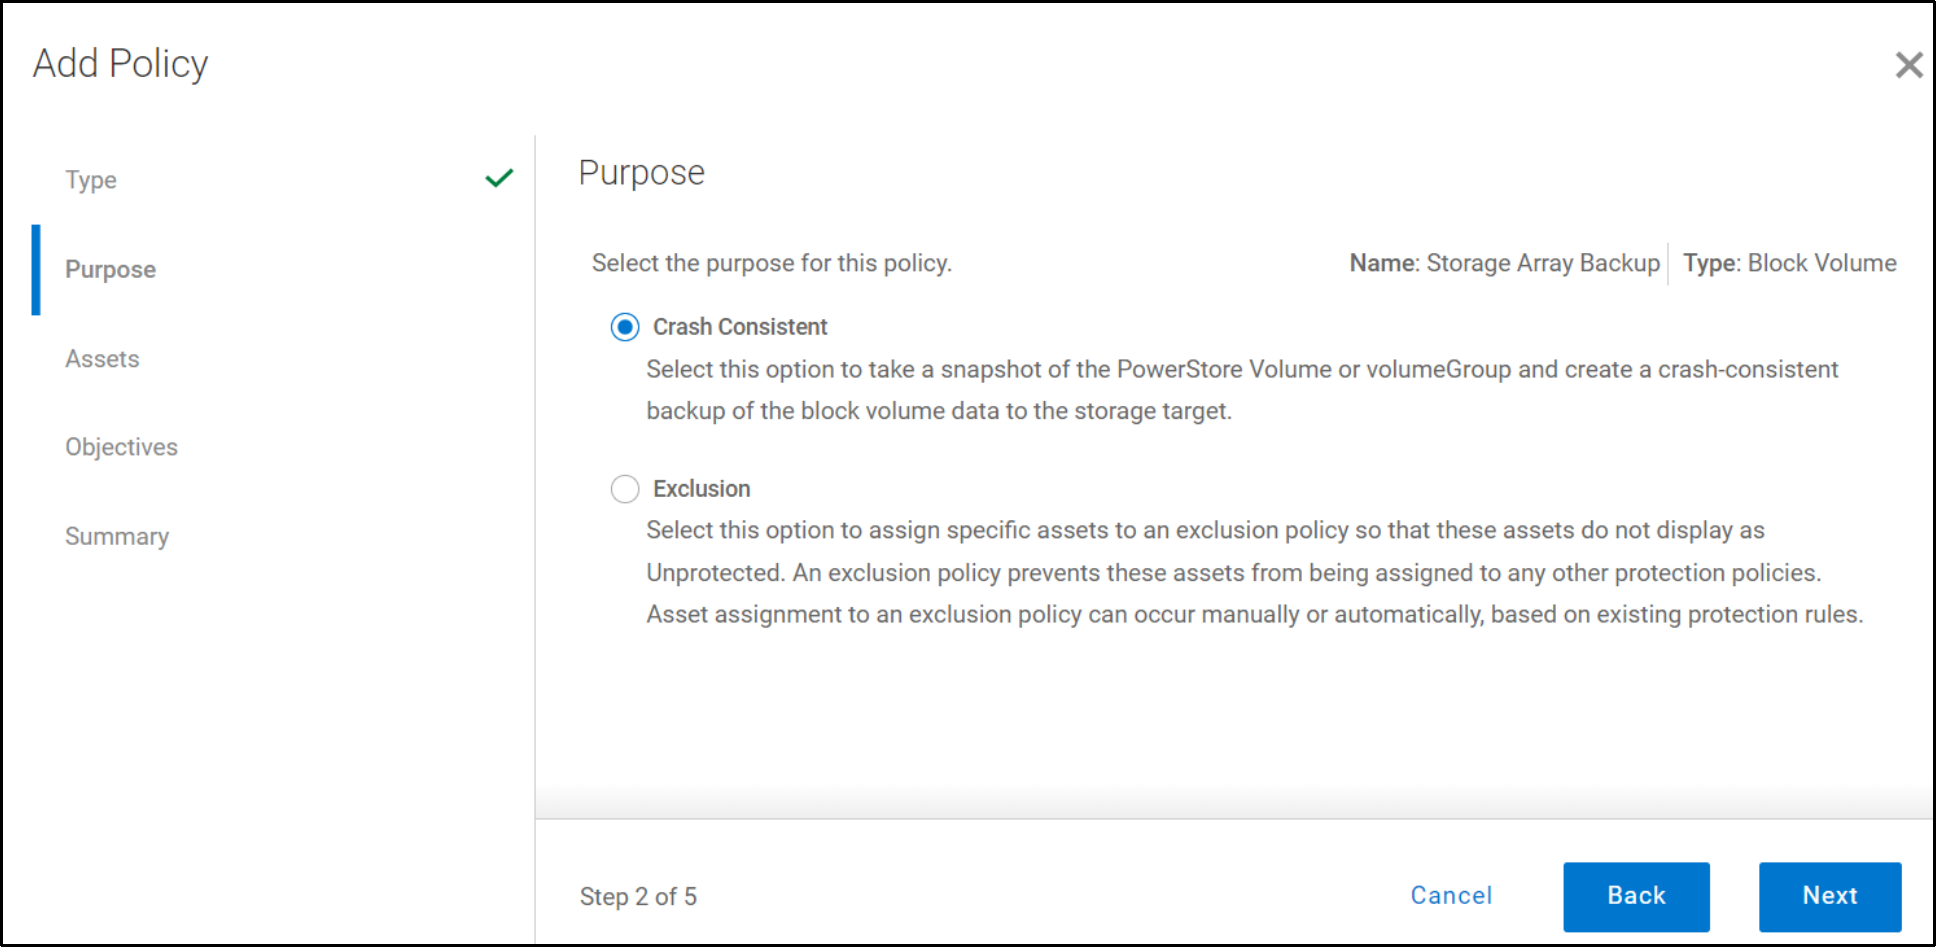 The image shows the option to select the protection policy purpose for storage array backup.